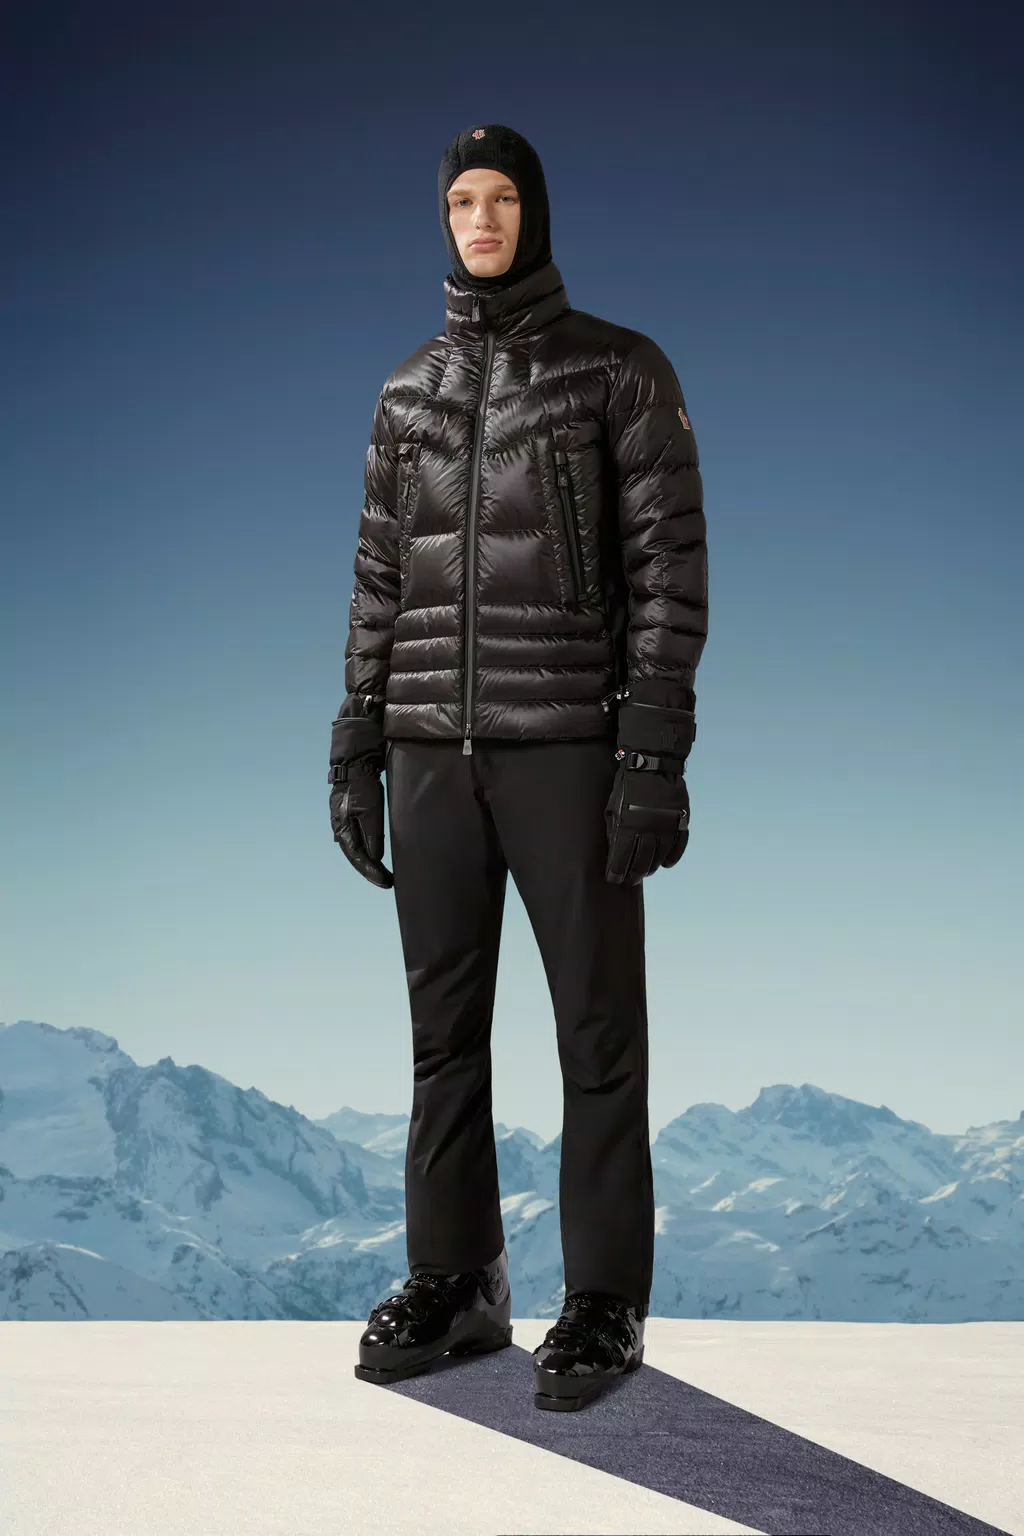 https://moncler-cdn.thron.com/delivery/public/image/moncler/I20971A0005453071999_X/dpx6uv/std/1024x1536/plumifero-corto-canmore-hombre-negro-moncler.jpg?scalemode=centered&adjustcrop=reduce&quality=80&format=WEBP